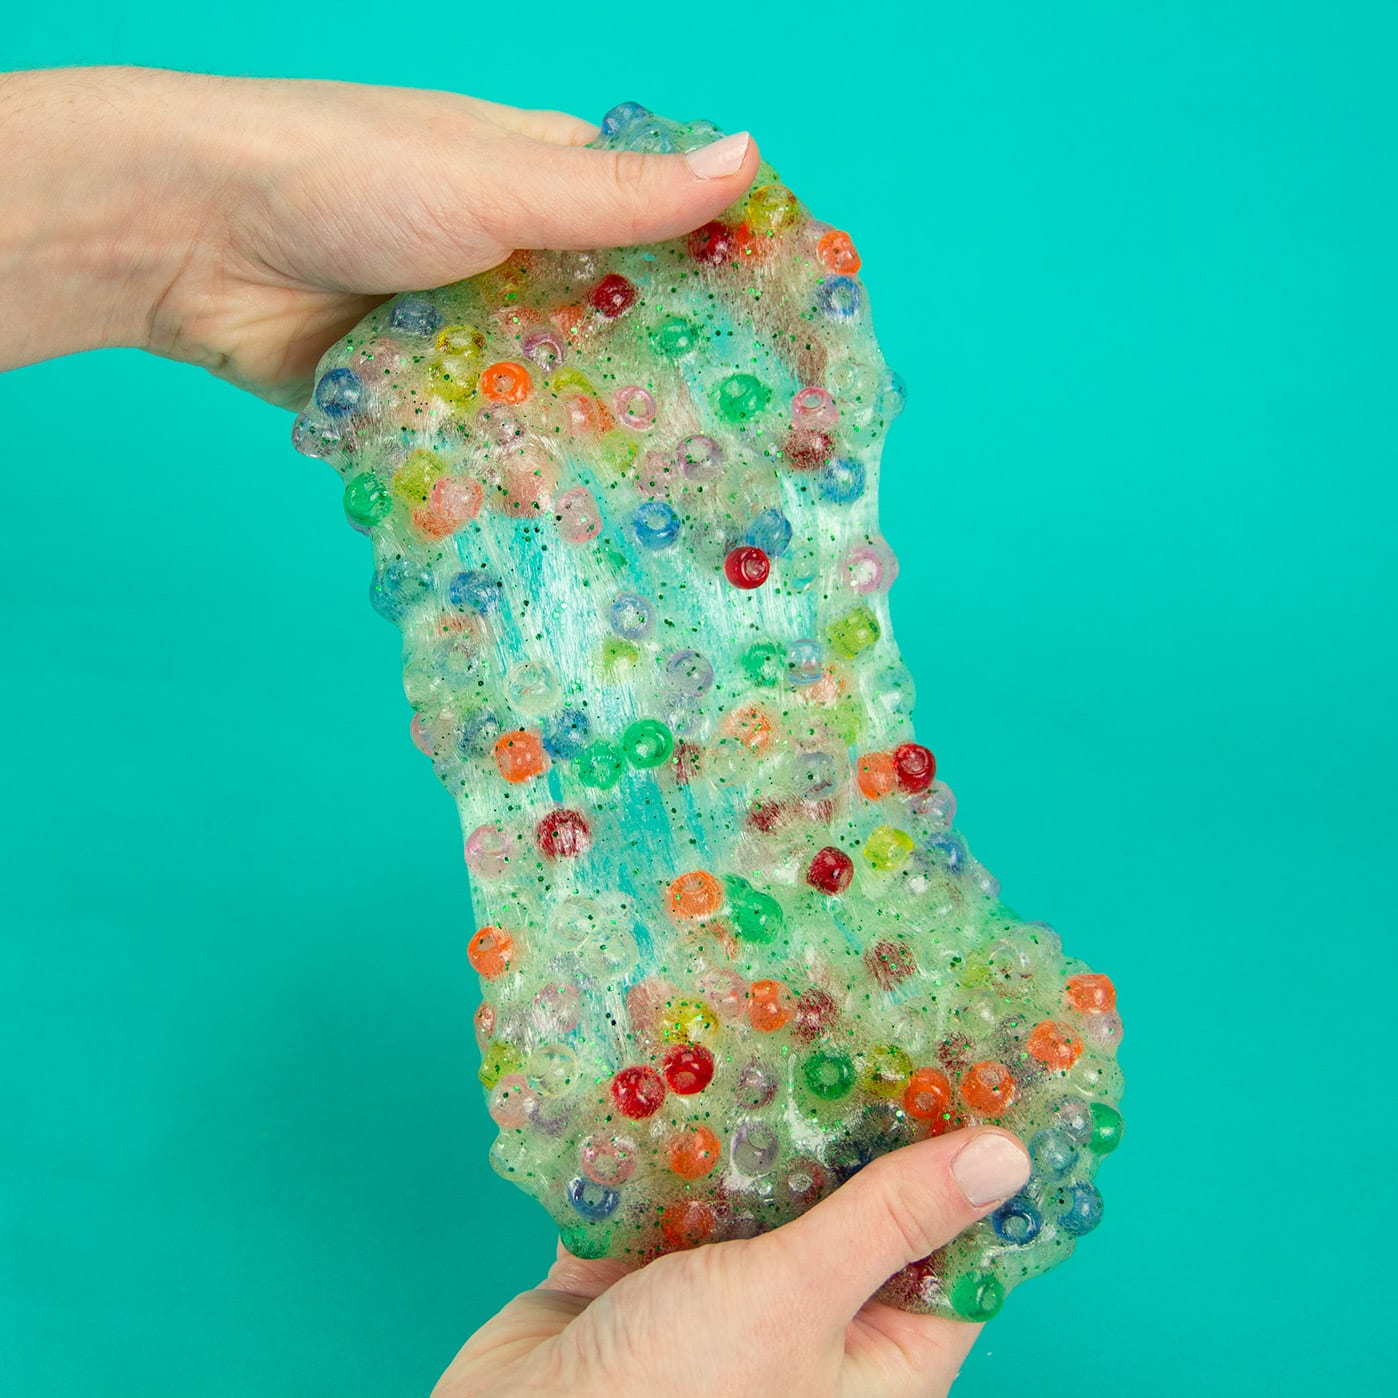 How To Make Crunchy Slime with Plastic Beads - Little Bins for